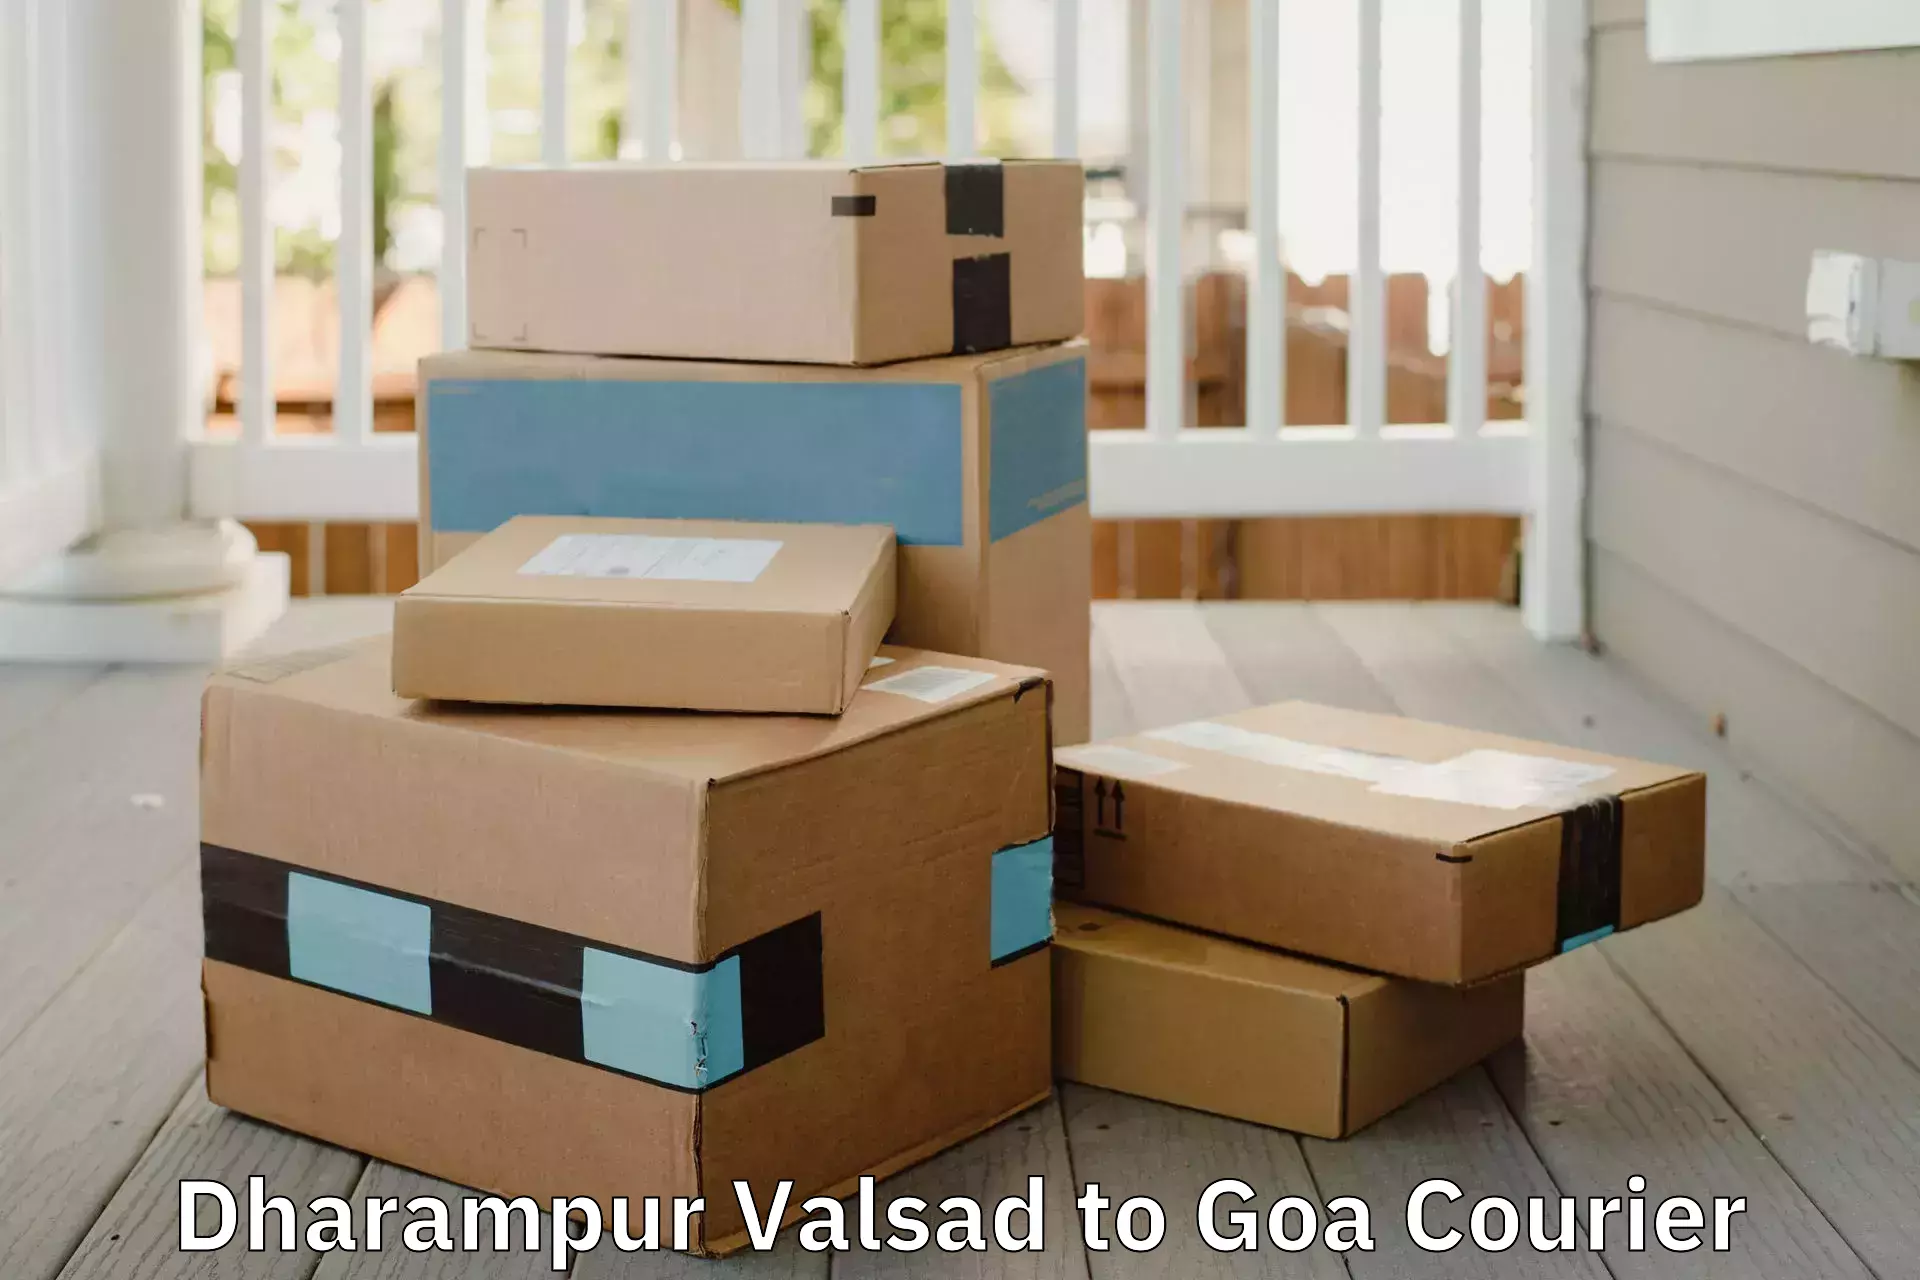 Specialized moving company Dharampur Valsad to South Goa